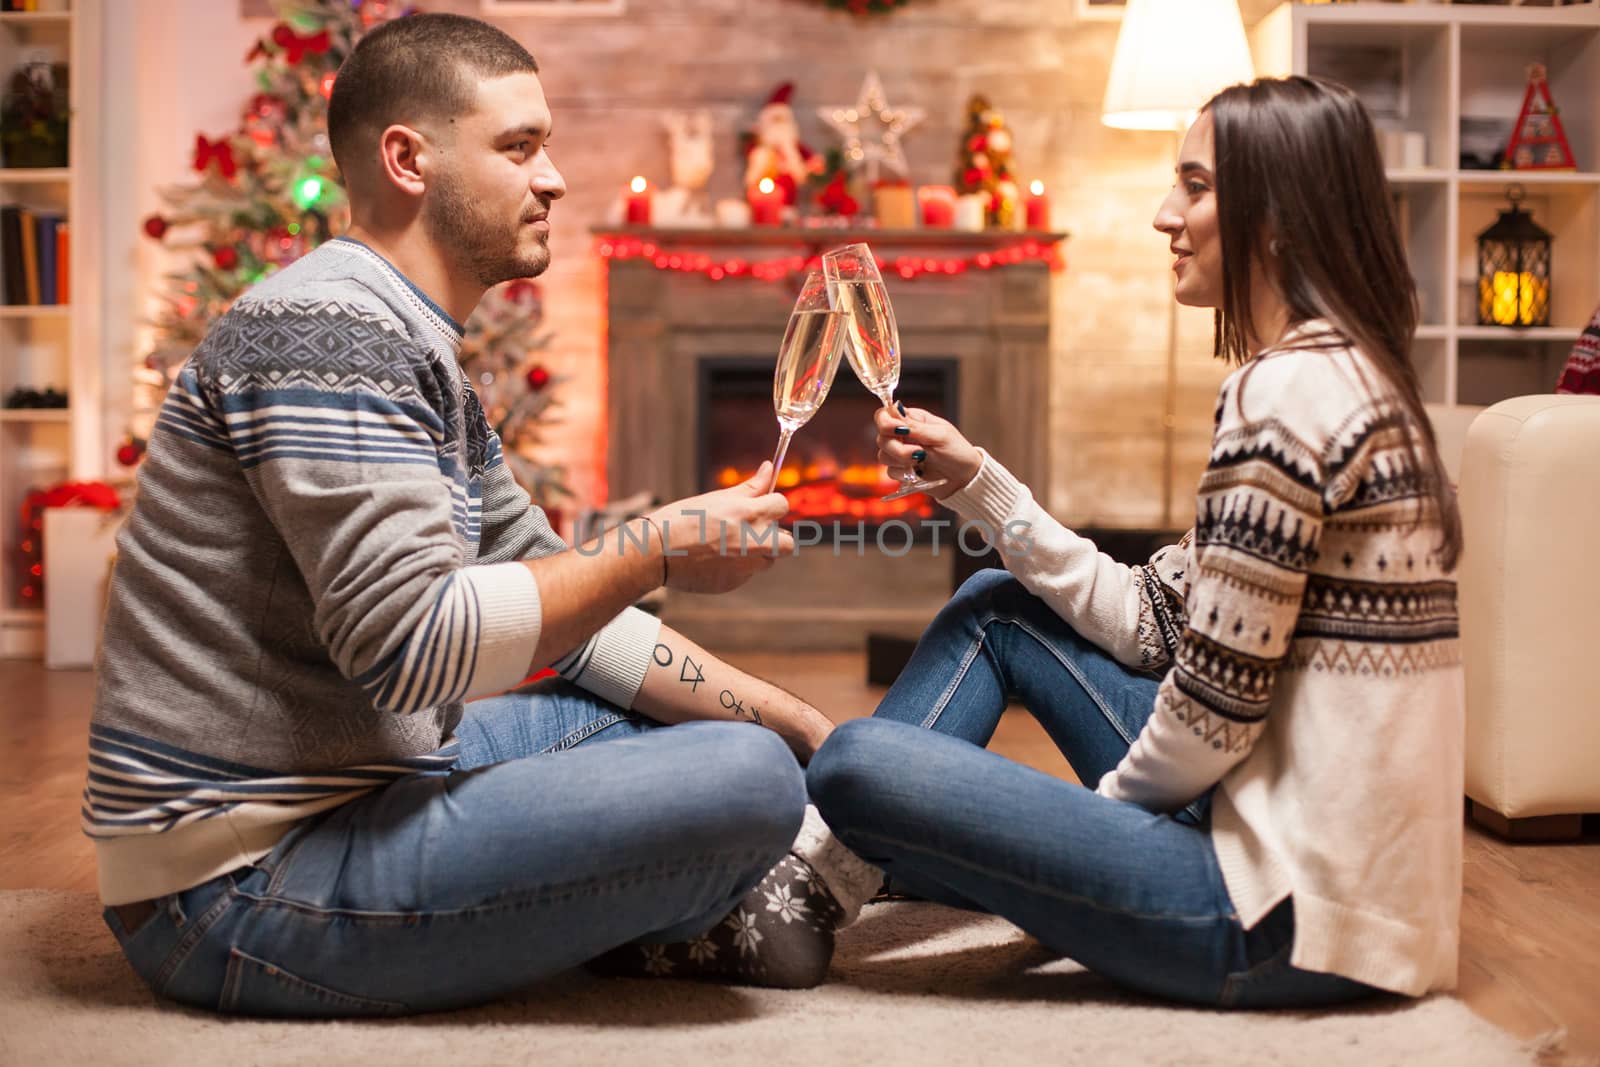 Romantic couple on christmas day in front of warm fireplace by DCStudio